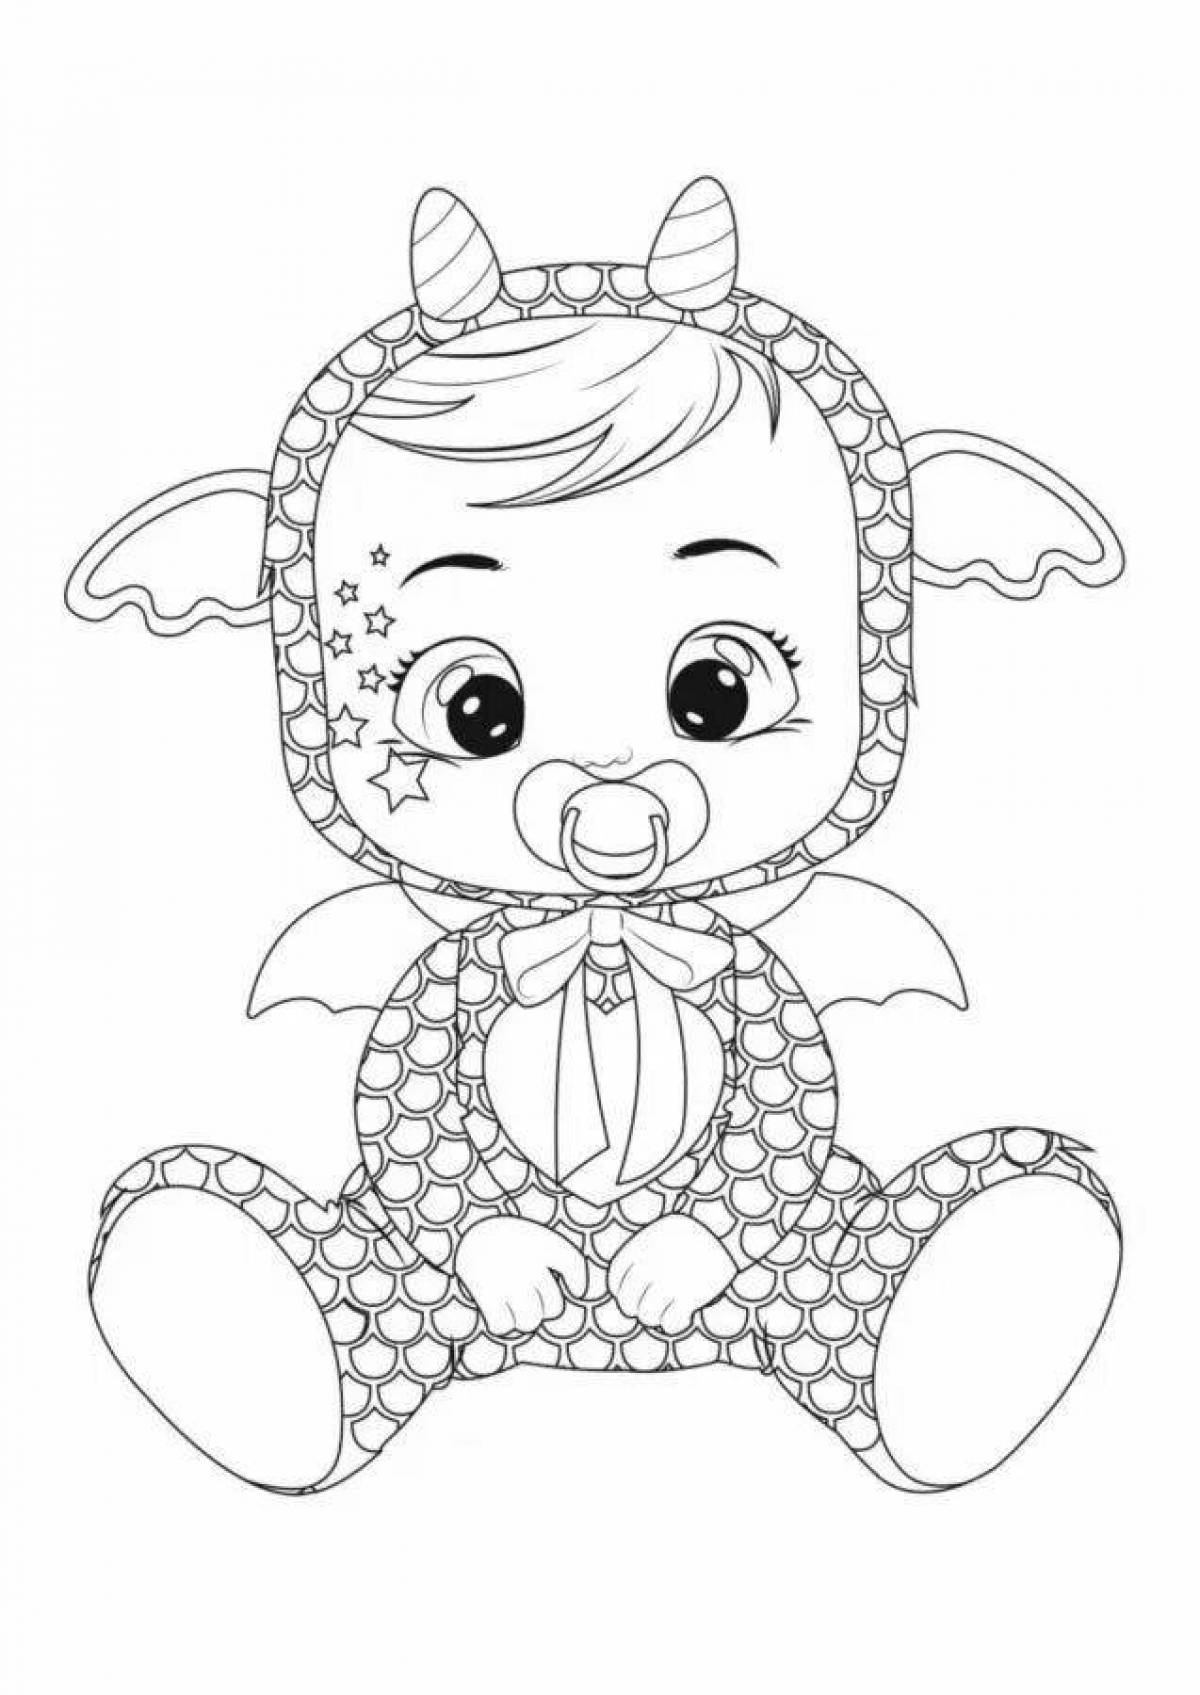 Luxury crybaby coloring book